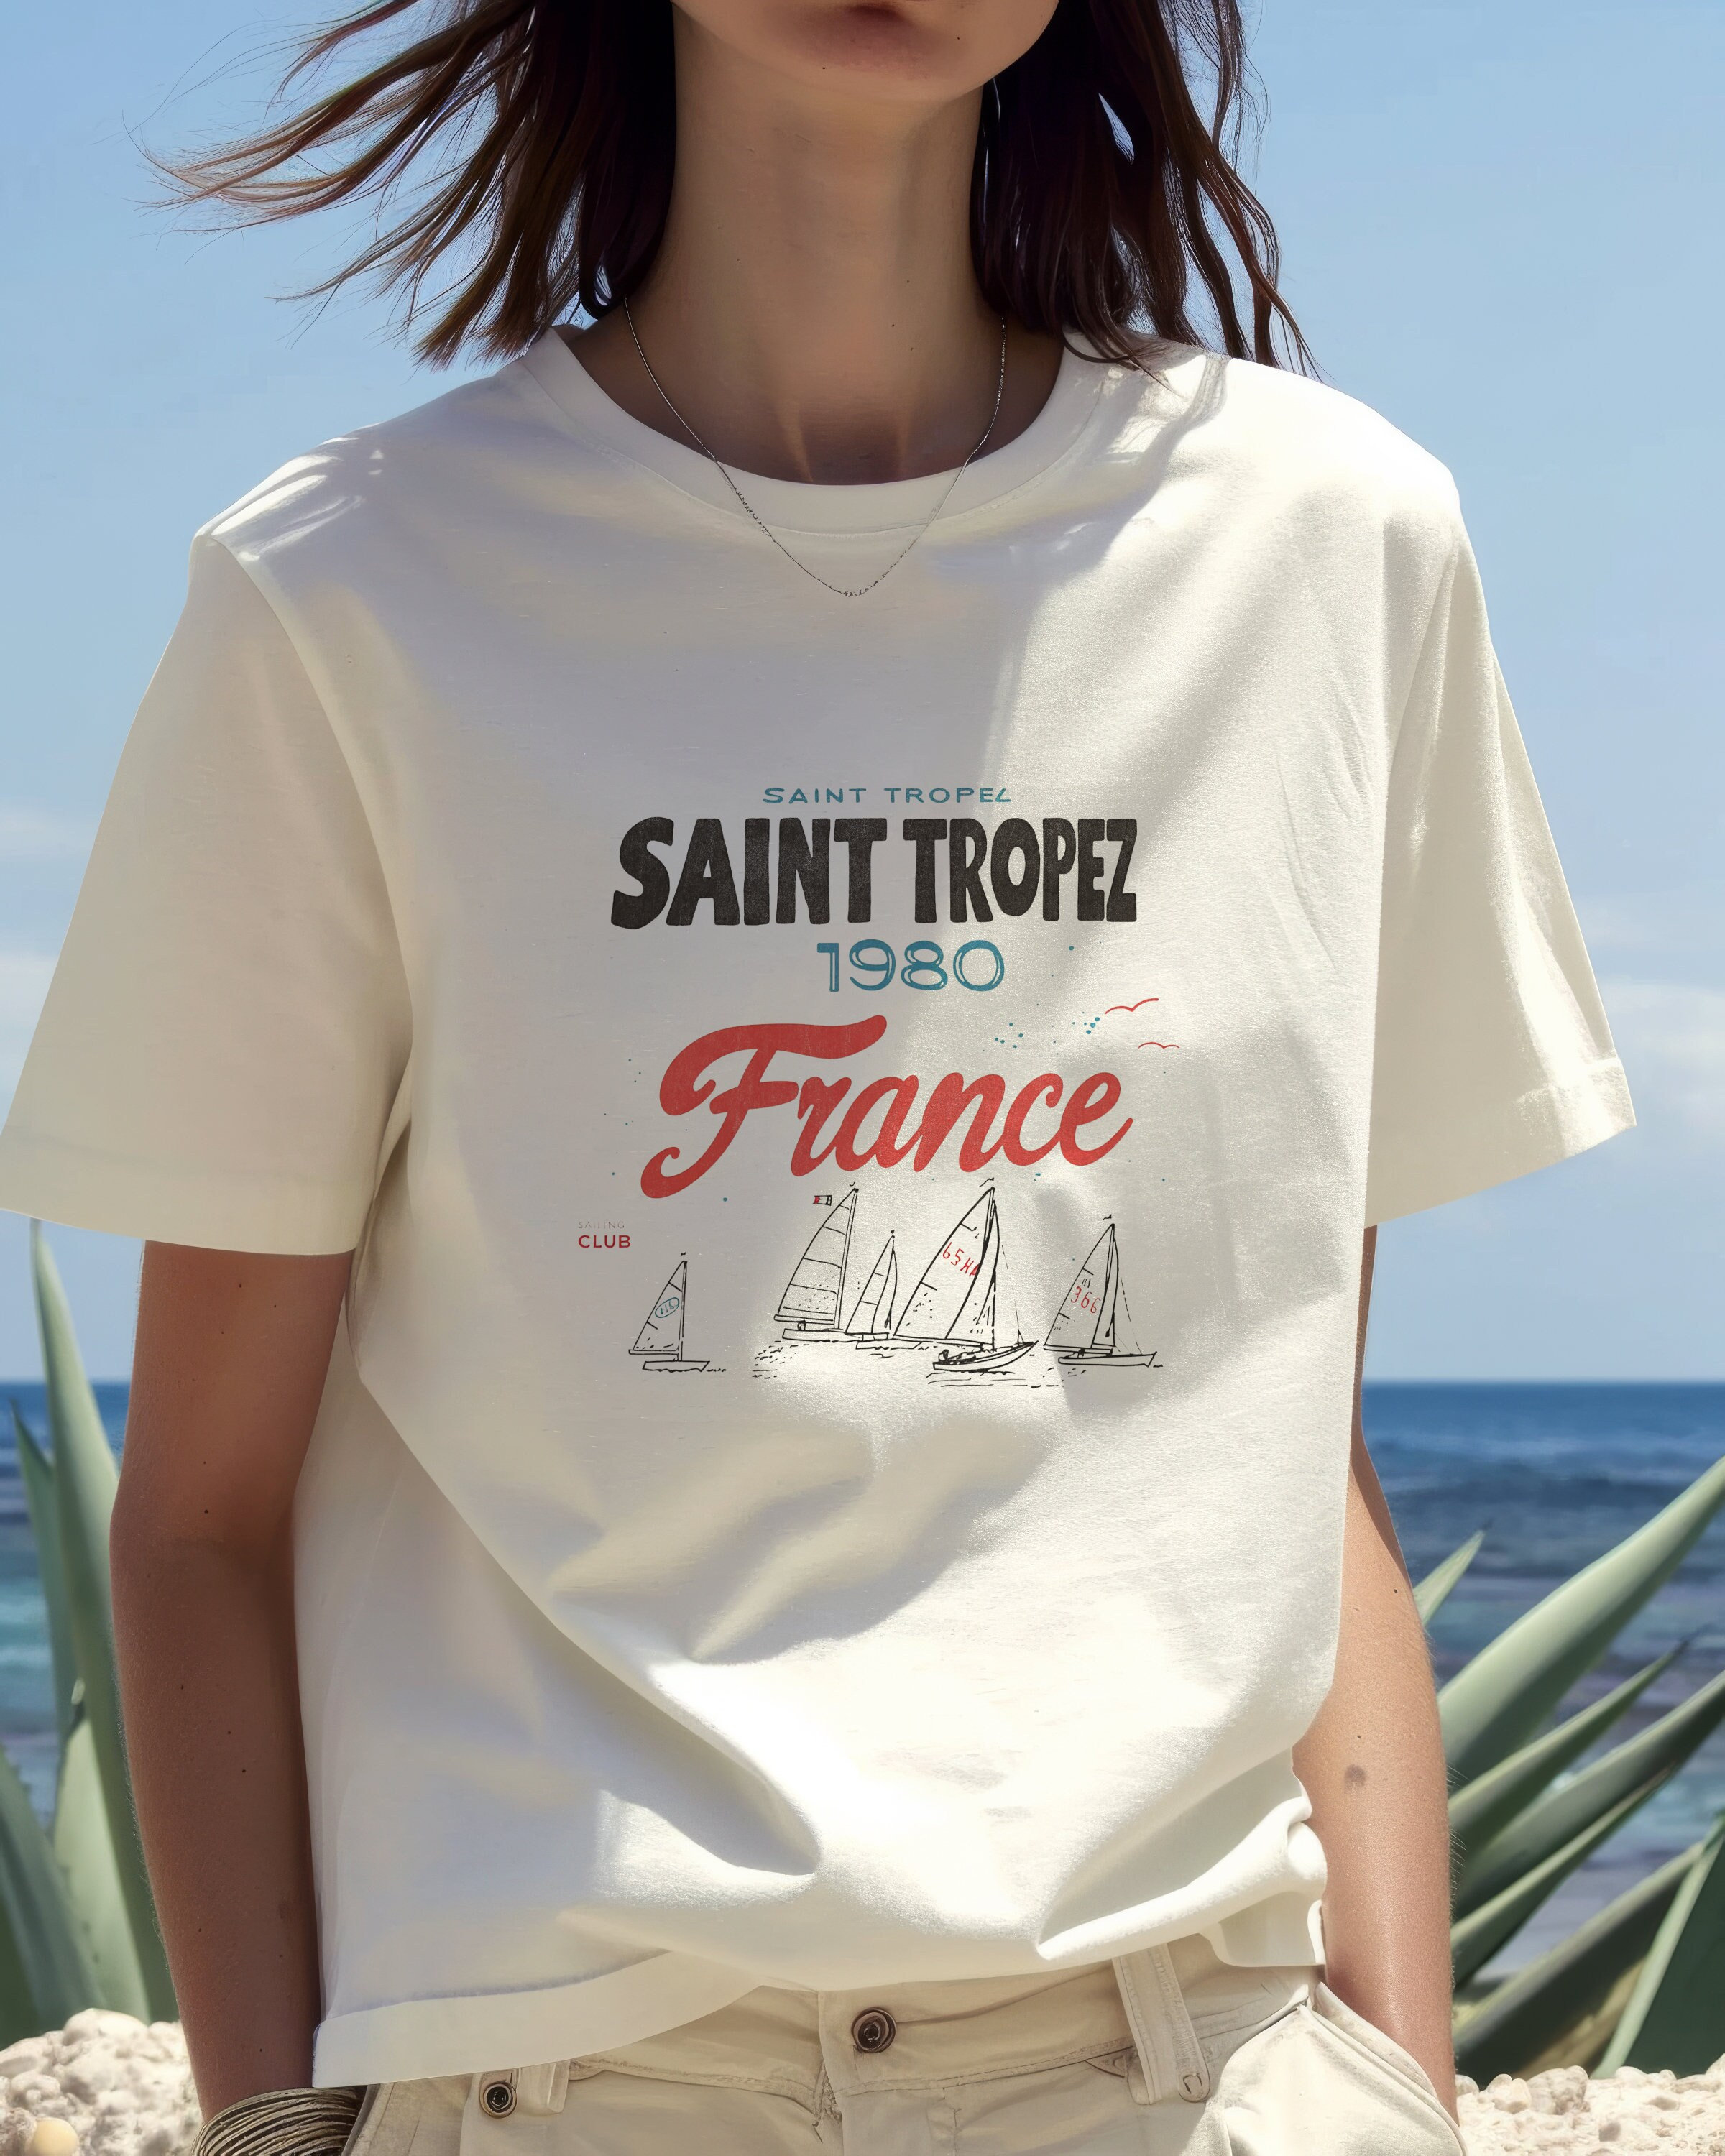 Saint Tropez France Sailing Club 1980 T-Shirt, Coastal Cowgirl Graphic Tee, Travel Vacation, Vintage Aesthetic Trendy, unisex Relaxed Fit